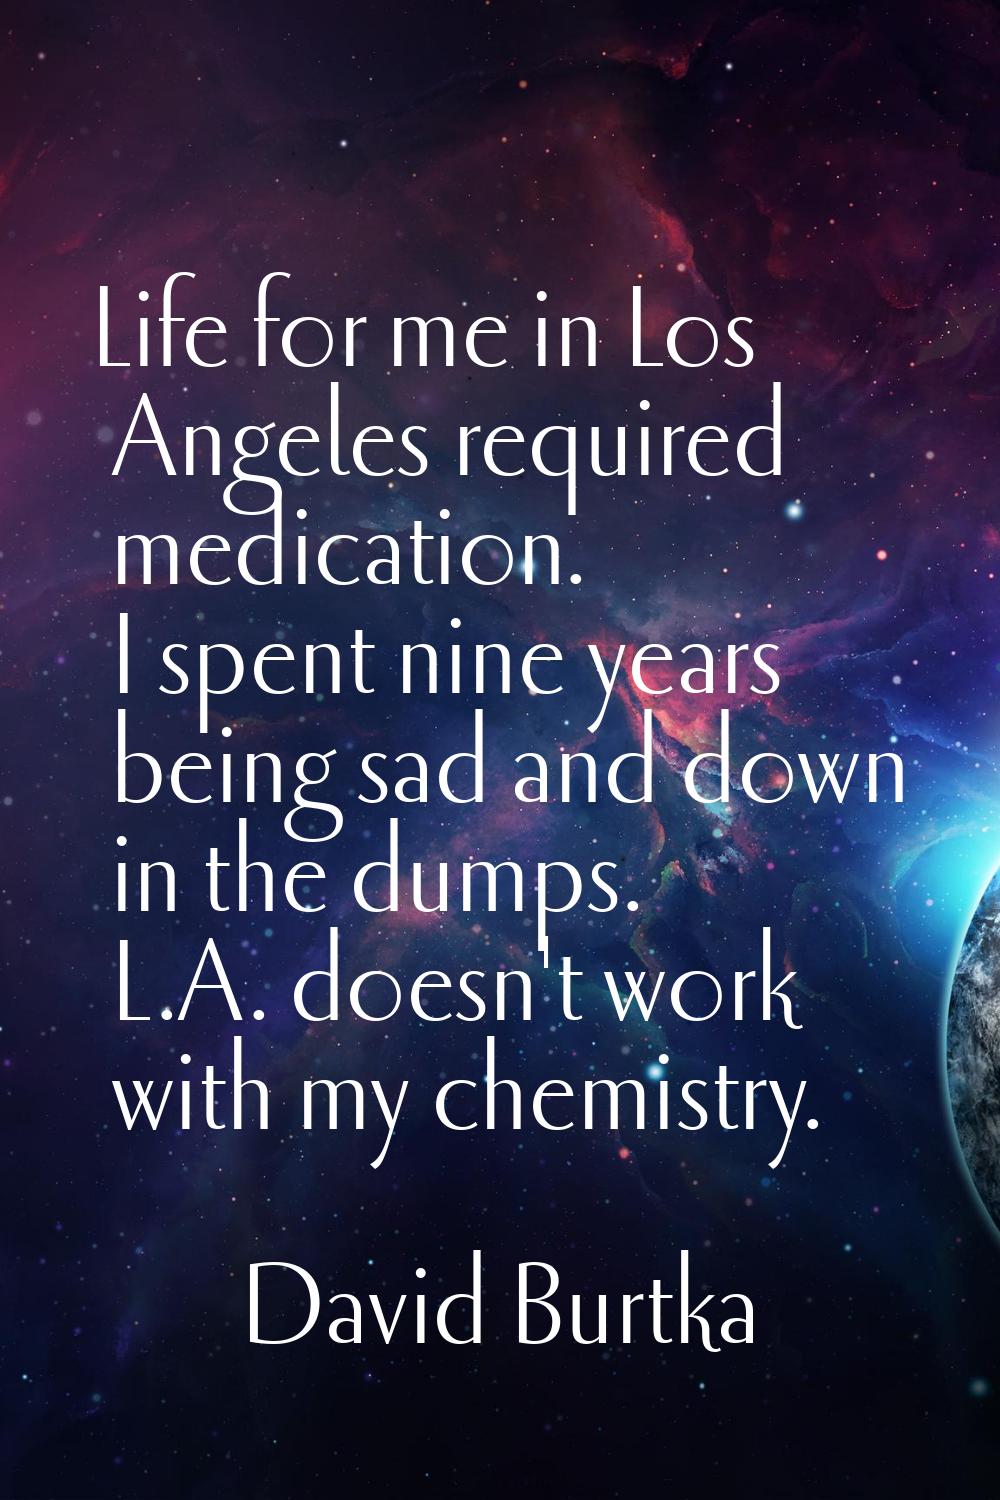 Life for me in Los Angeles required medication. I spent nine years being sad and down in the dumps.